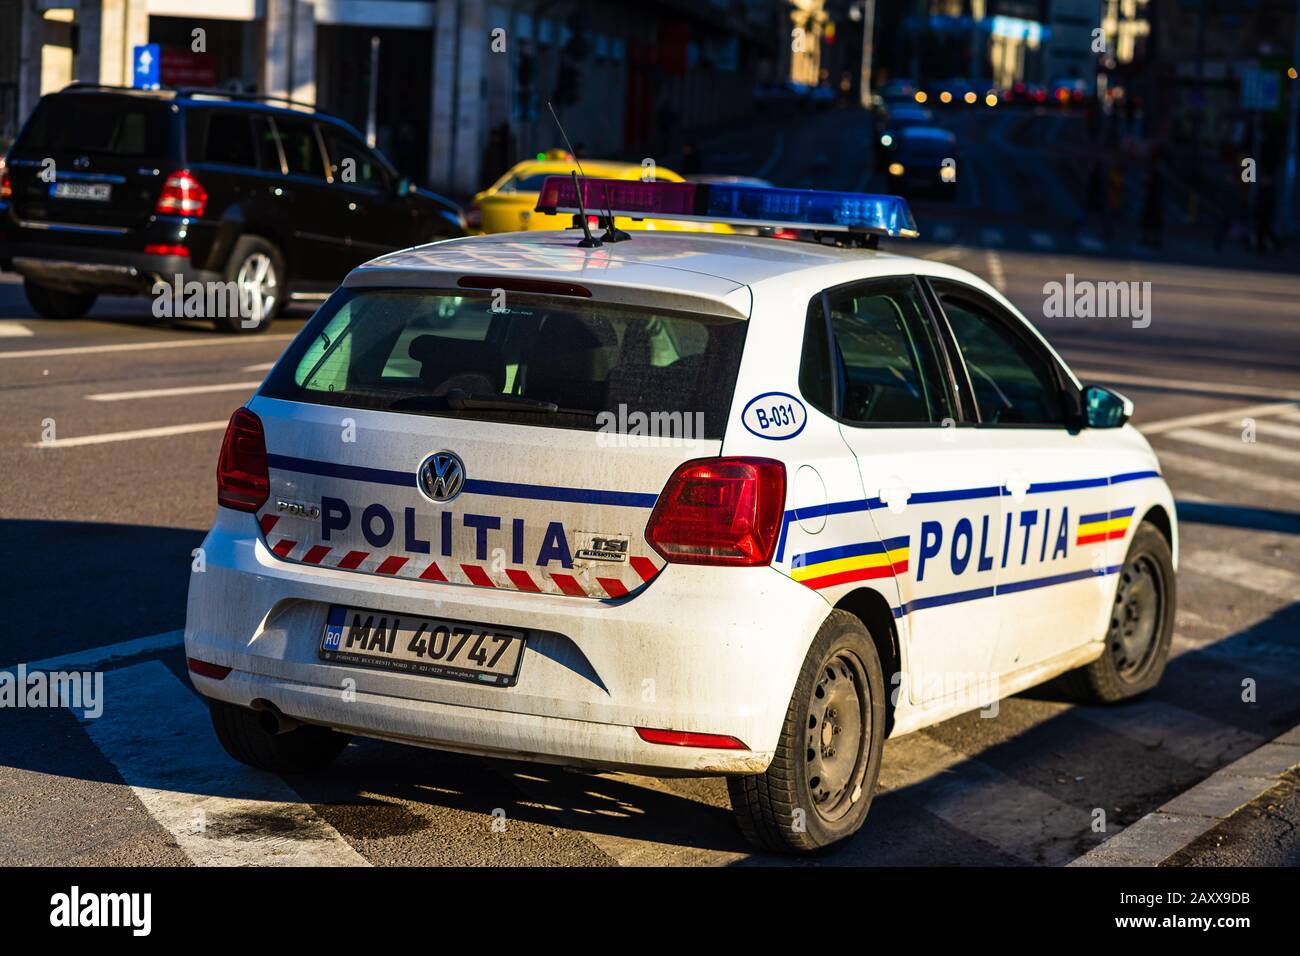 Police car (Politia Rutiera) parked in a junction in downtown Bucharest,  Romania, 2020 Stock Photo - Alamy